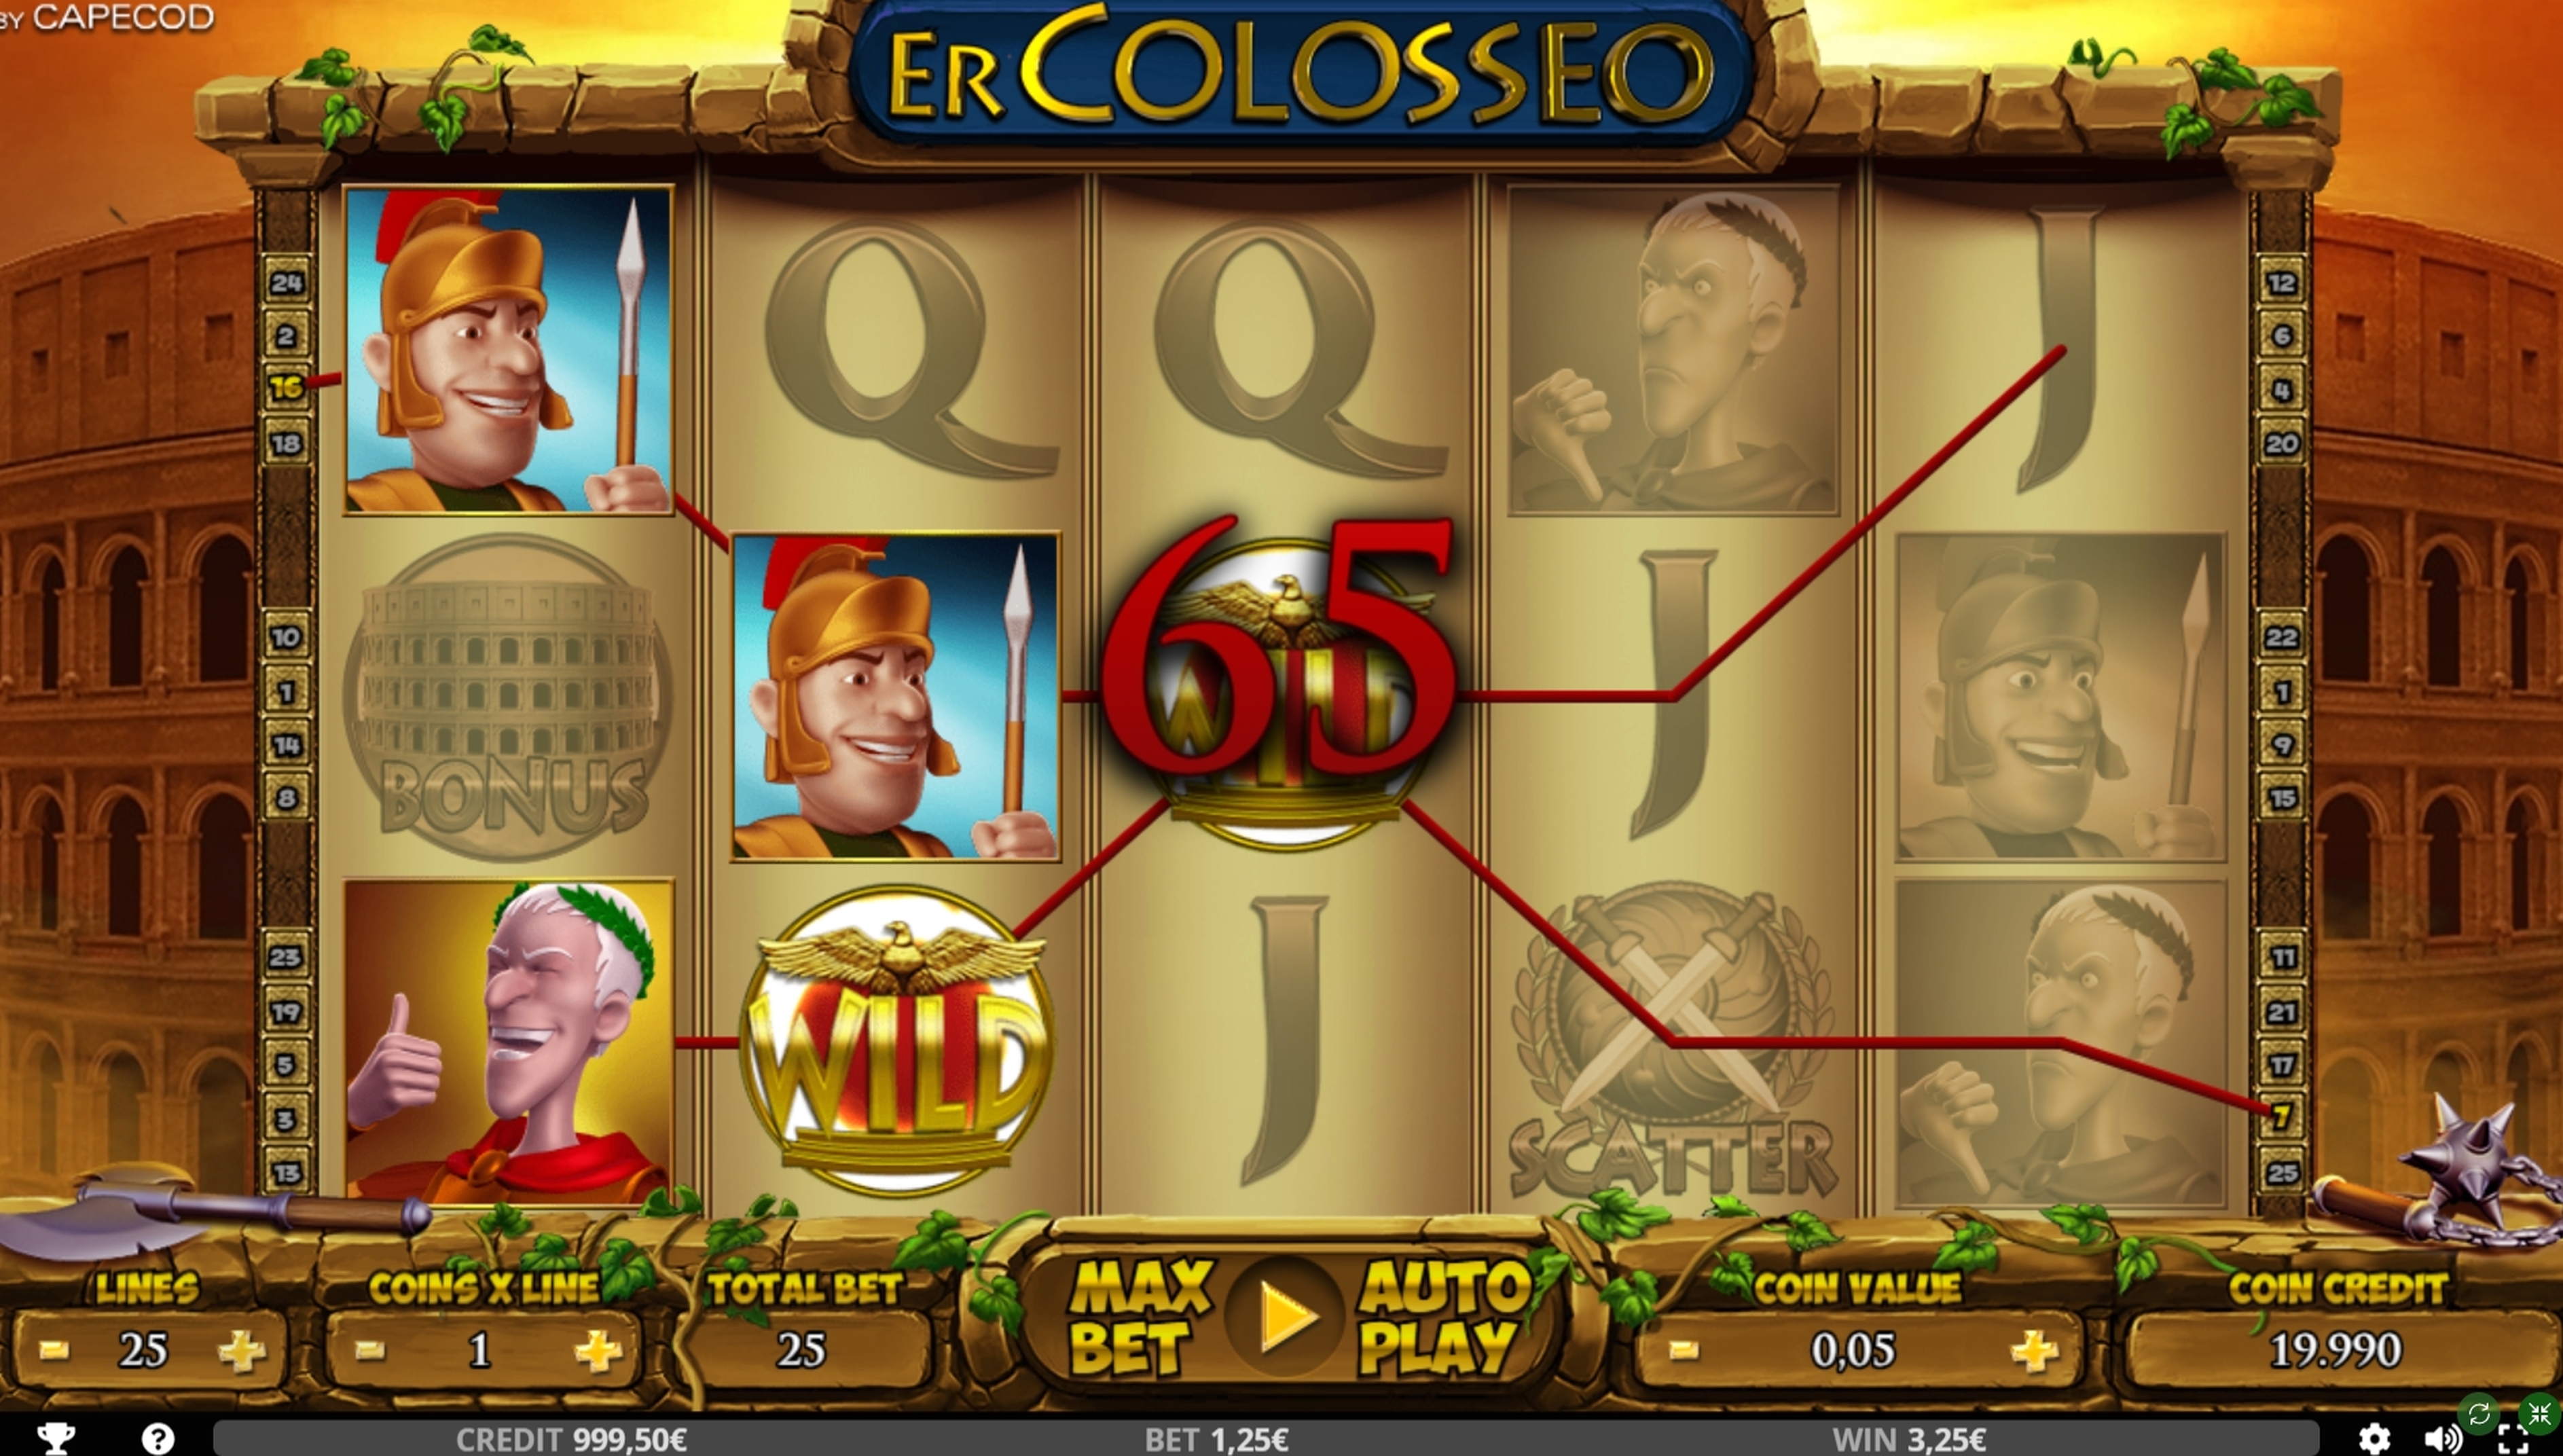 Win Money in Er Colosseo Free Slot Game by Capecod Gaming